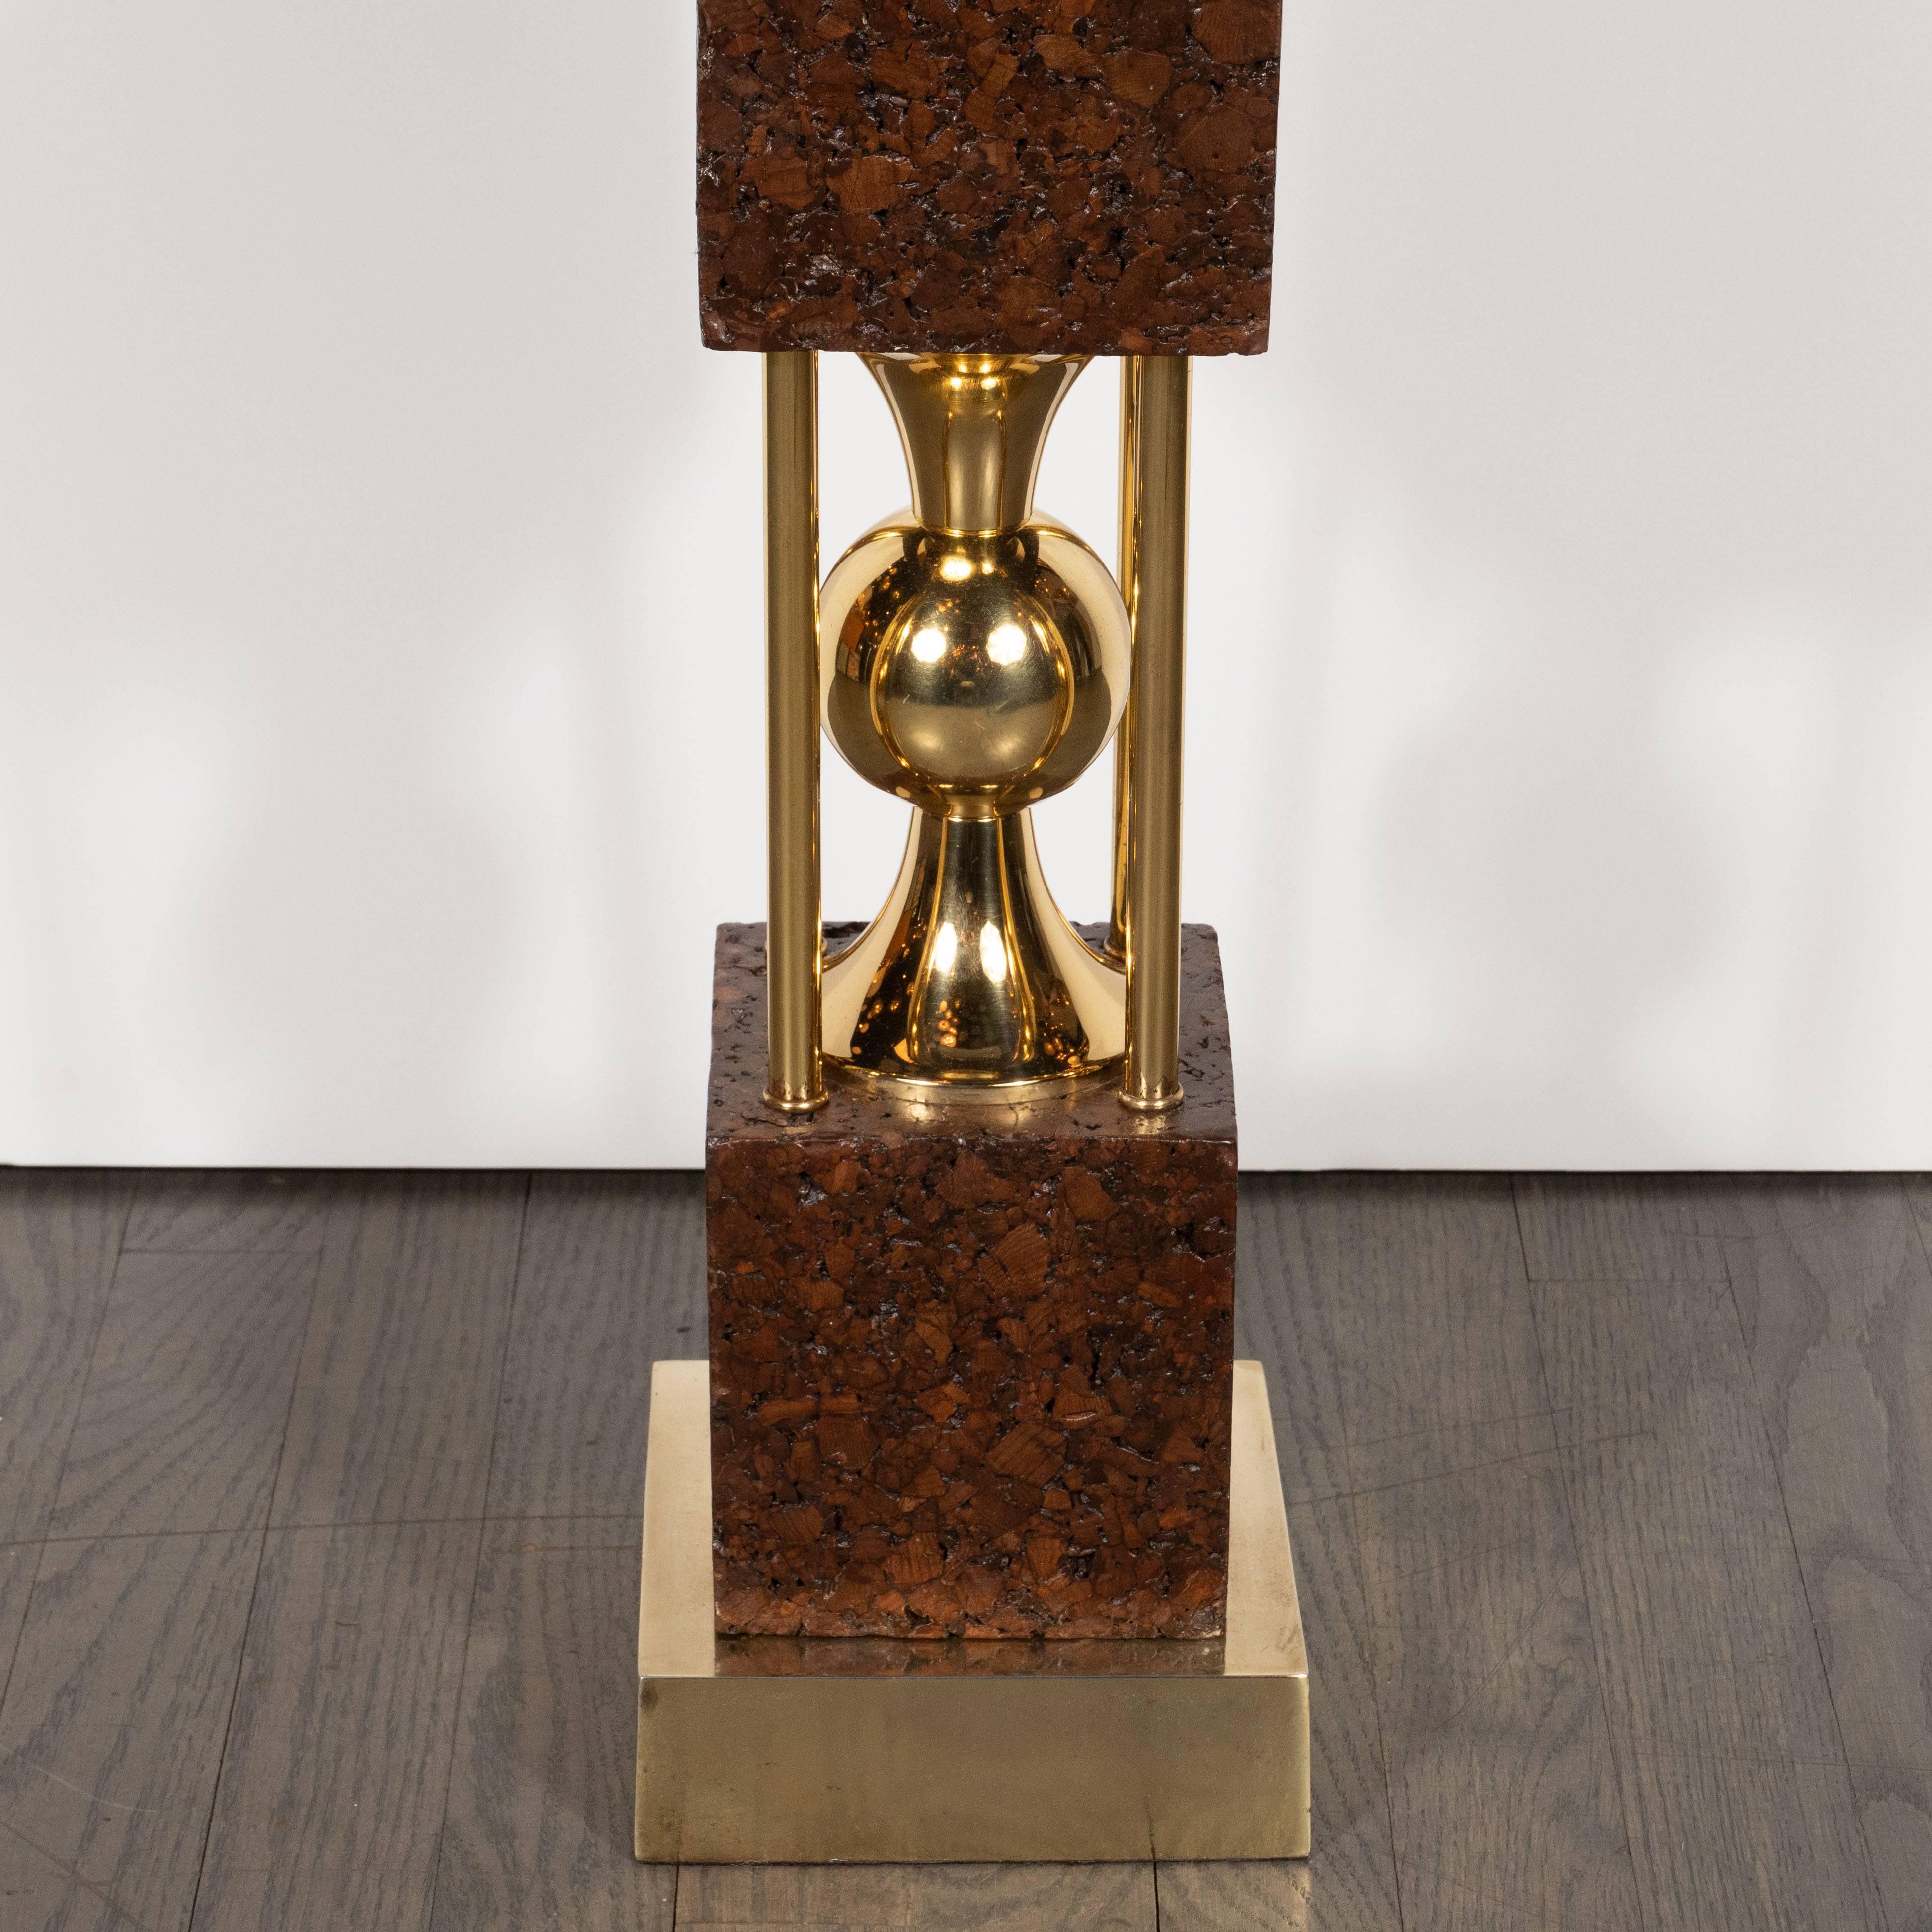 This stunning and graphic pair of table lamps were realized in the United States, circa 1960. They feature three square forms in cork finished in a burnt umber brown separated by hourglass forms that adjoin an orbital center in polished brass. Two